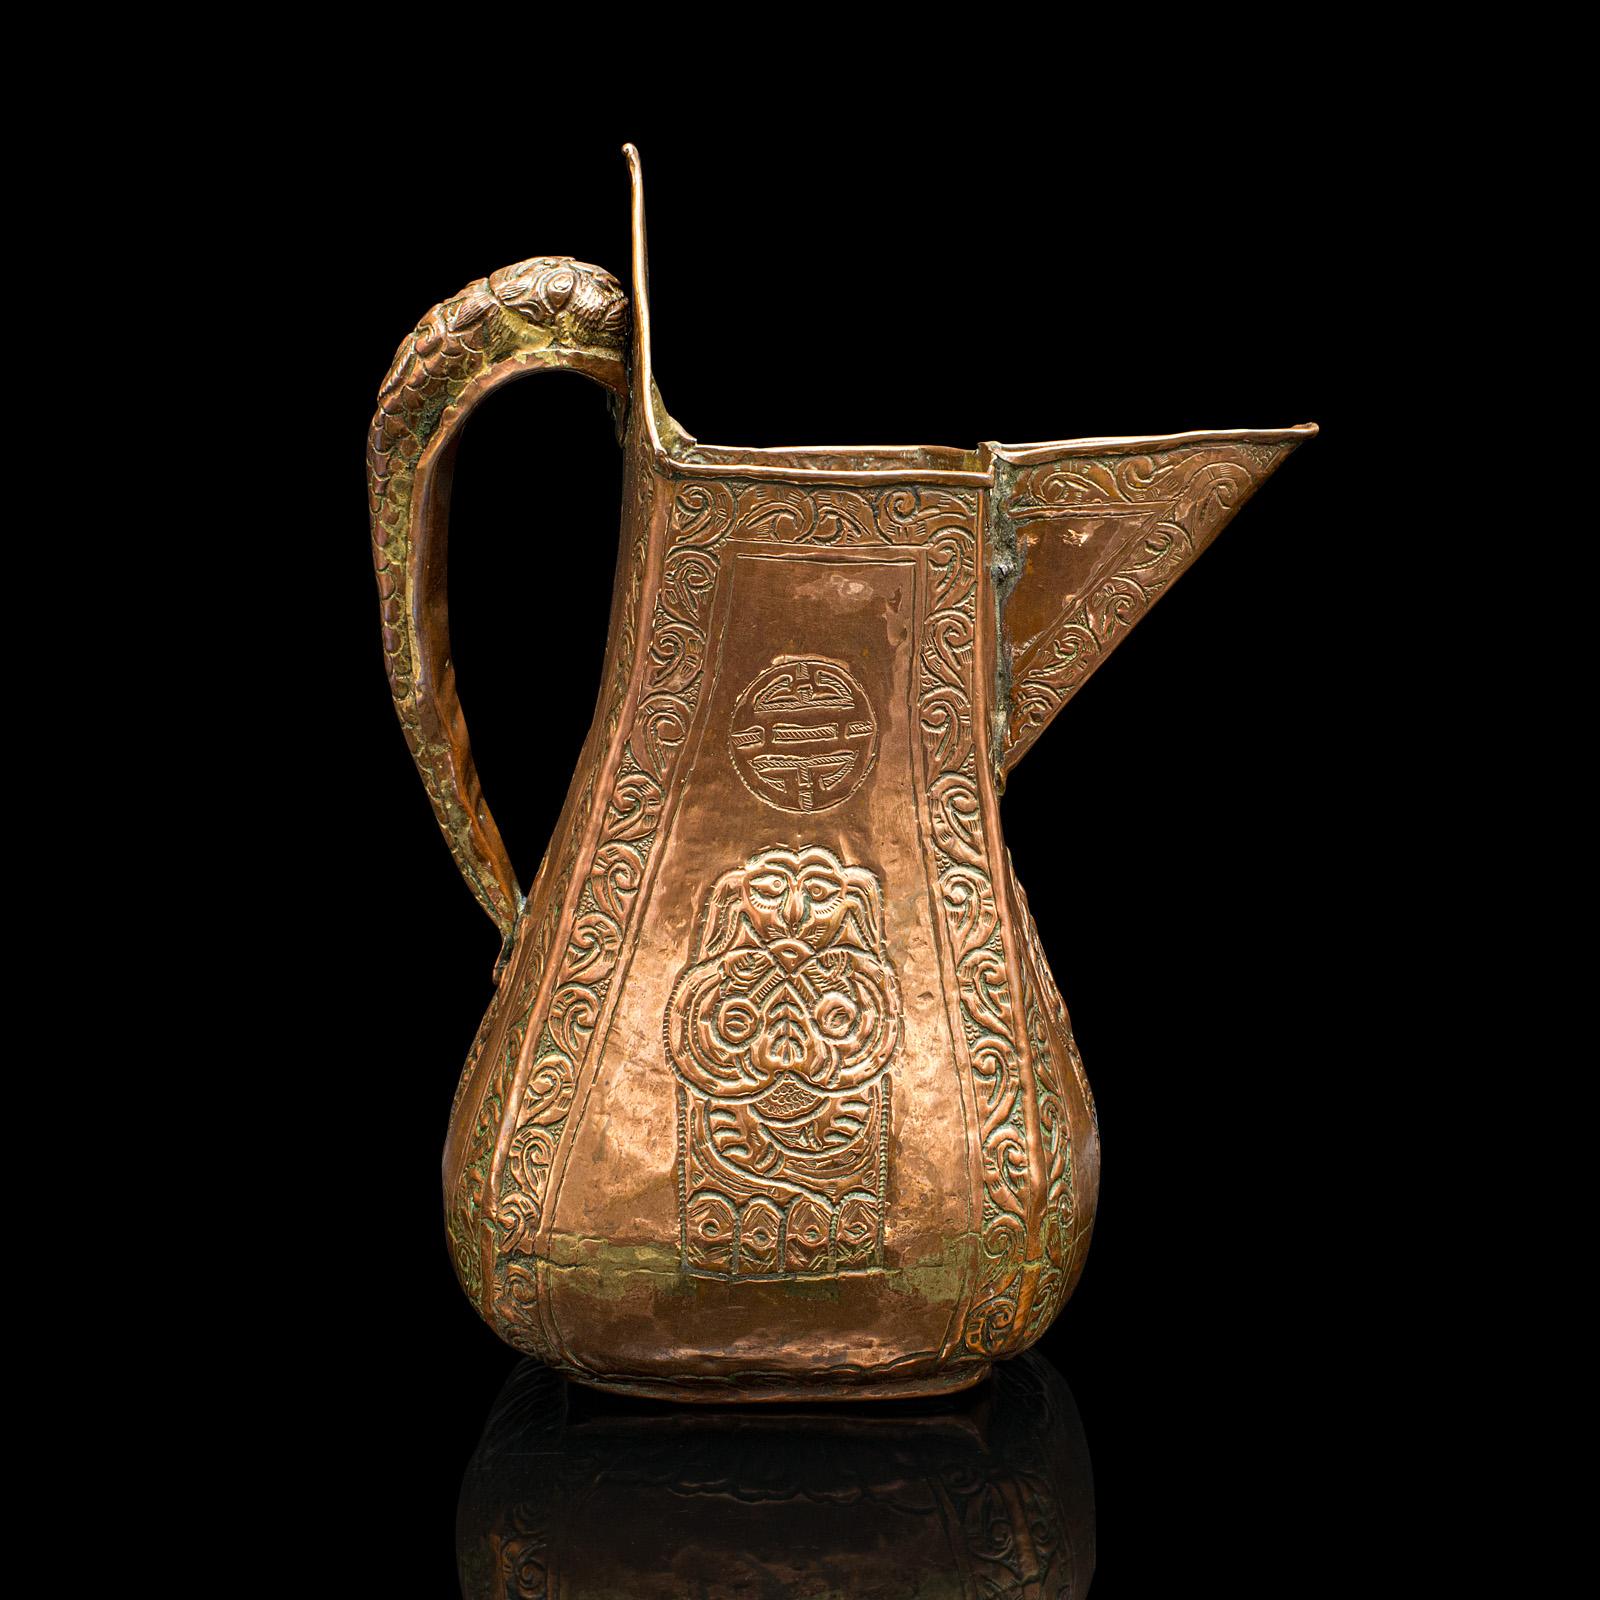 Antique Serving Jug, Chinese, Copper, Decorative Ewer, Provincial, Victorian In Good Condition For Sale In Hele, Devon, GB